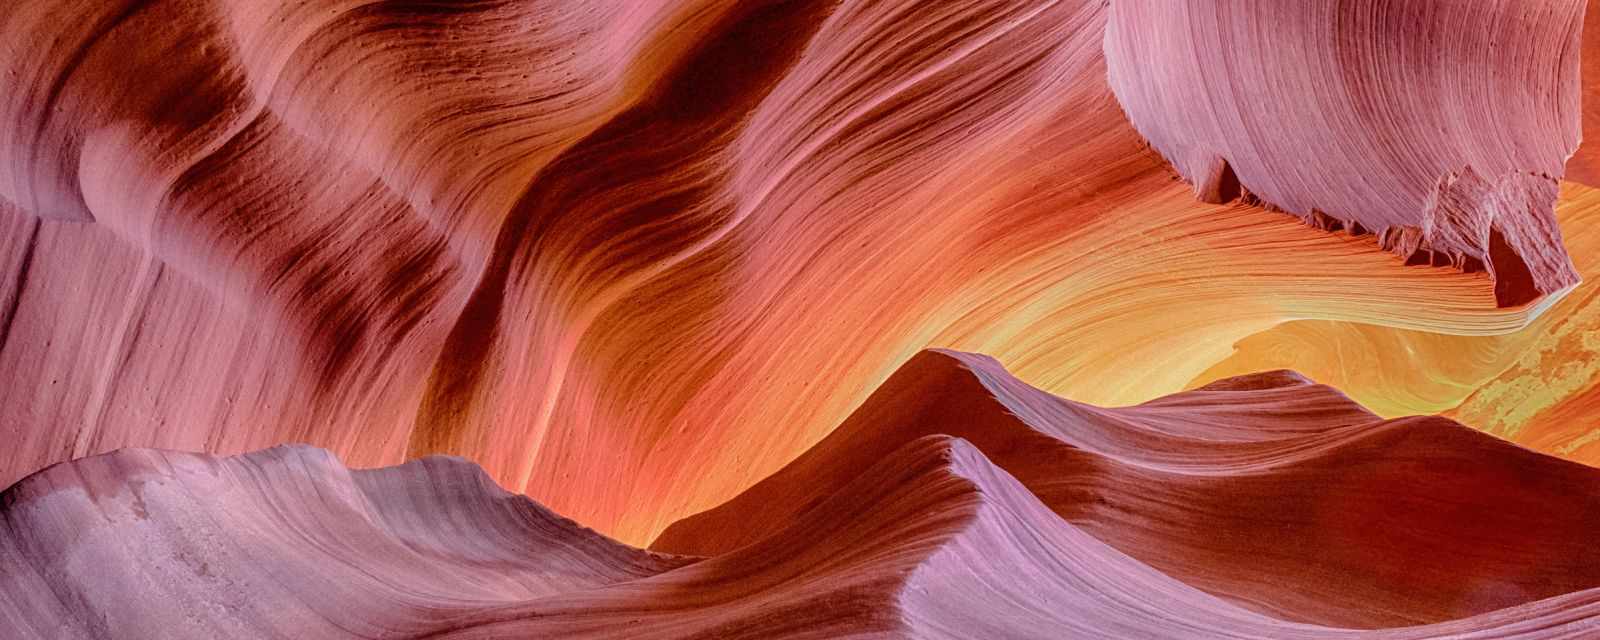 Ultimate Antelope Canyon Guide